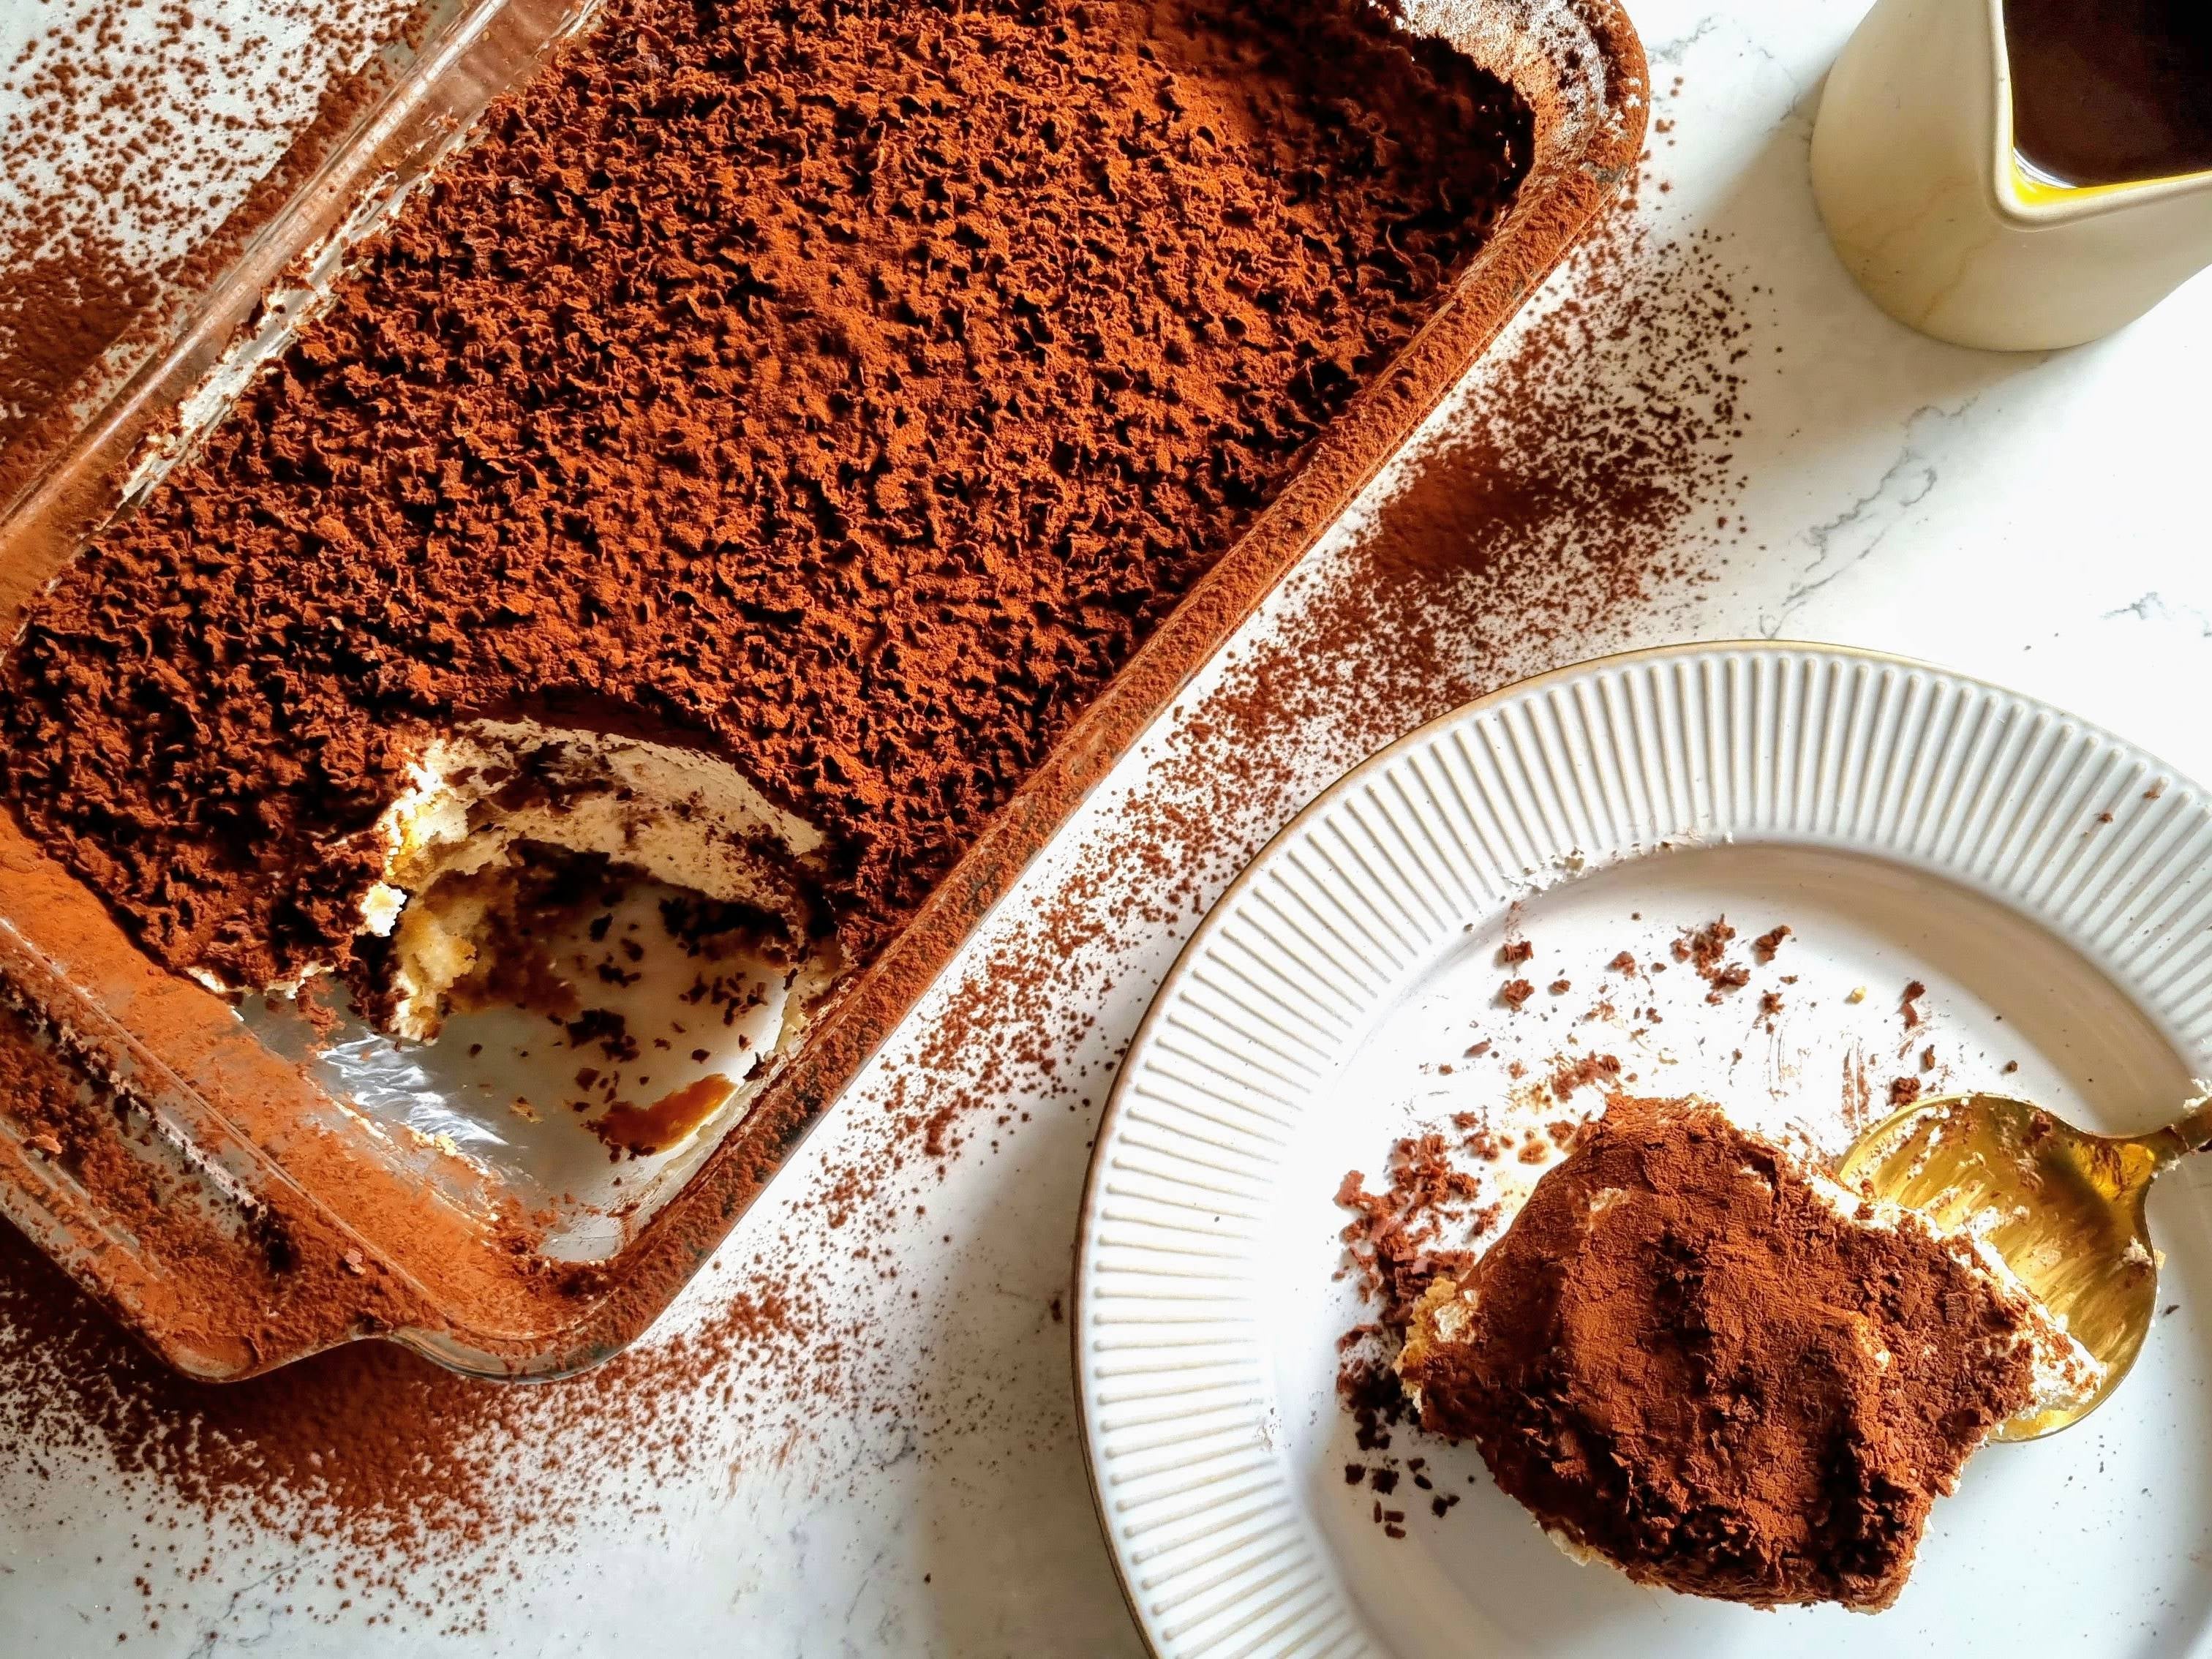 Slice being taken out of a homemade tiramisu and put onto a white plate